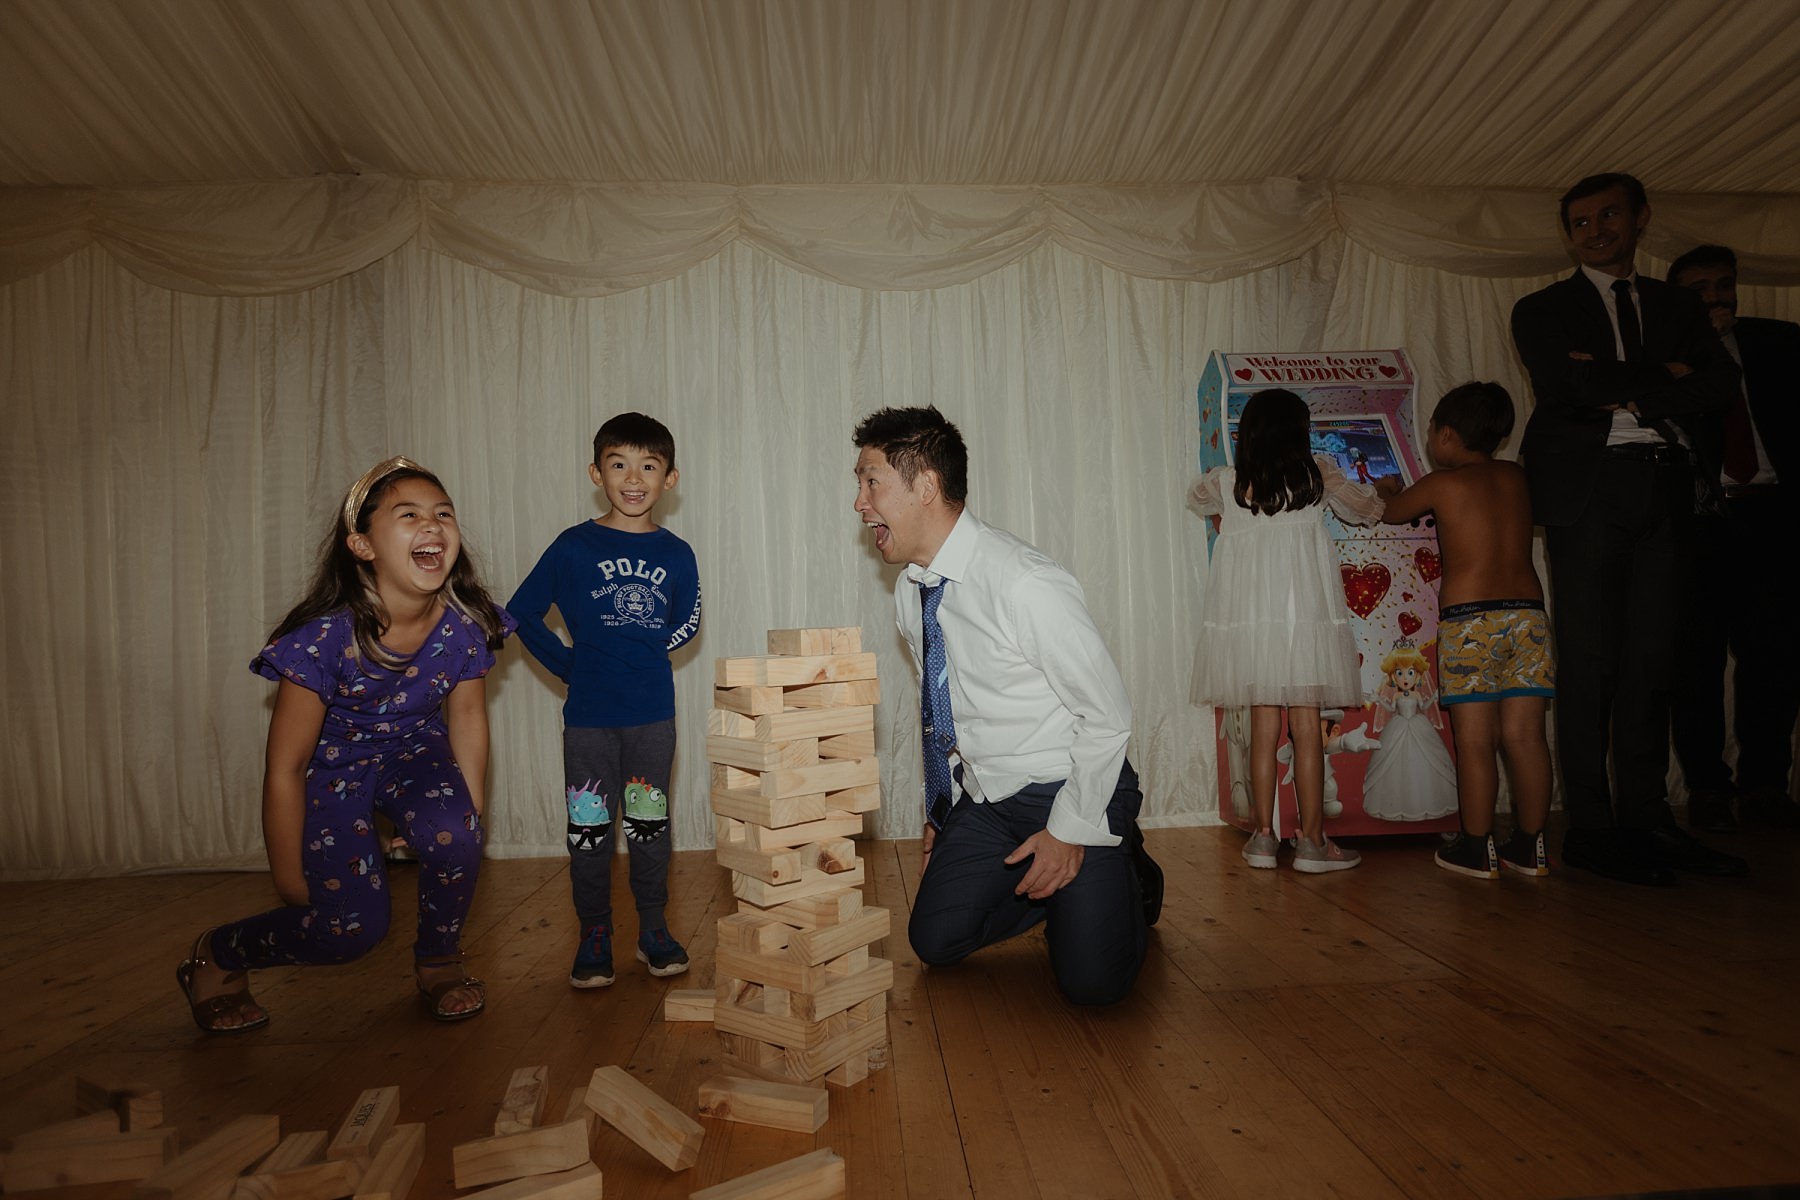 cluny castle wedding scotland reception with retro games for guests jenga evening entertainment